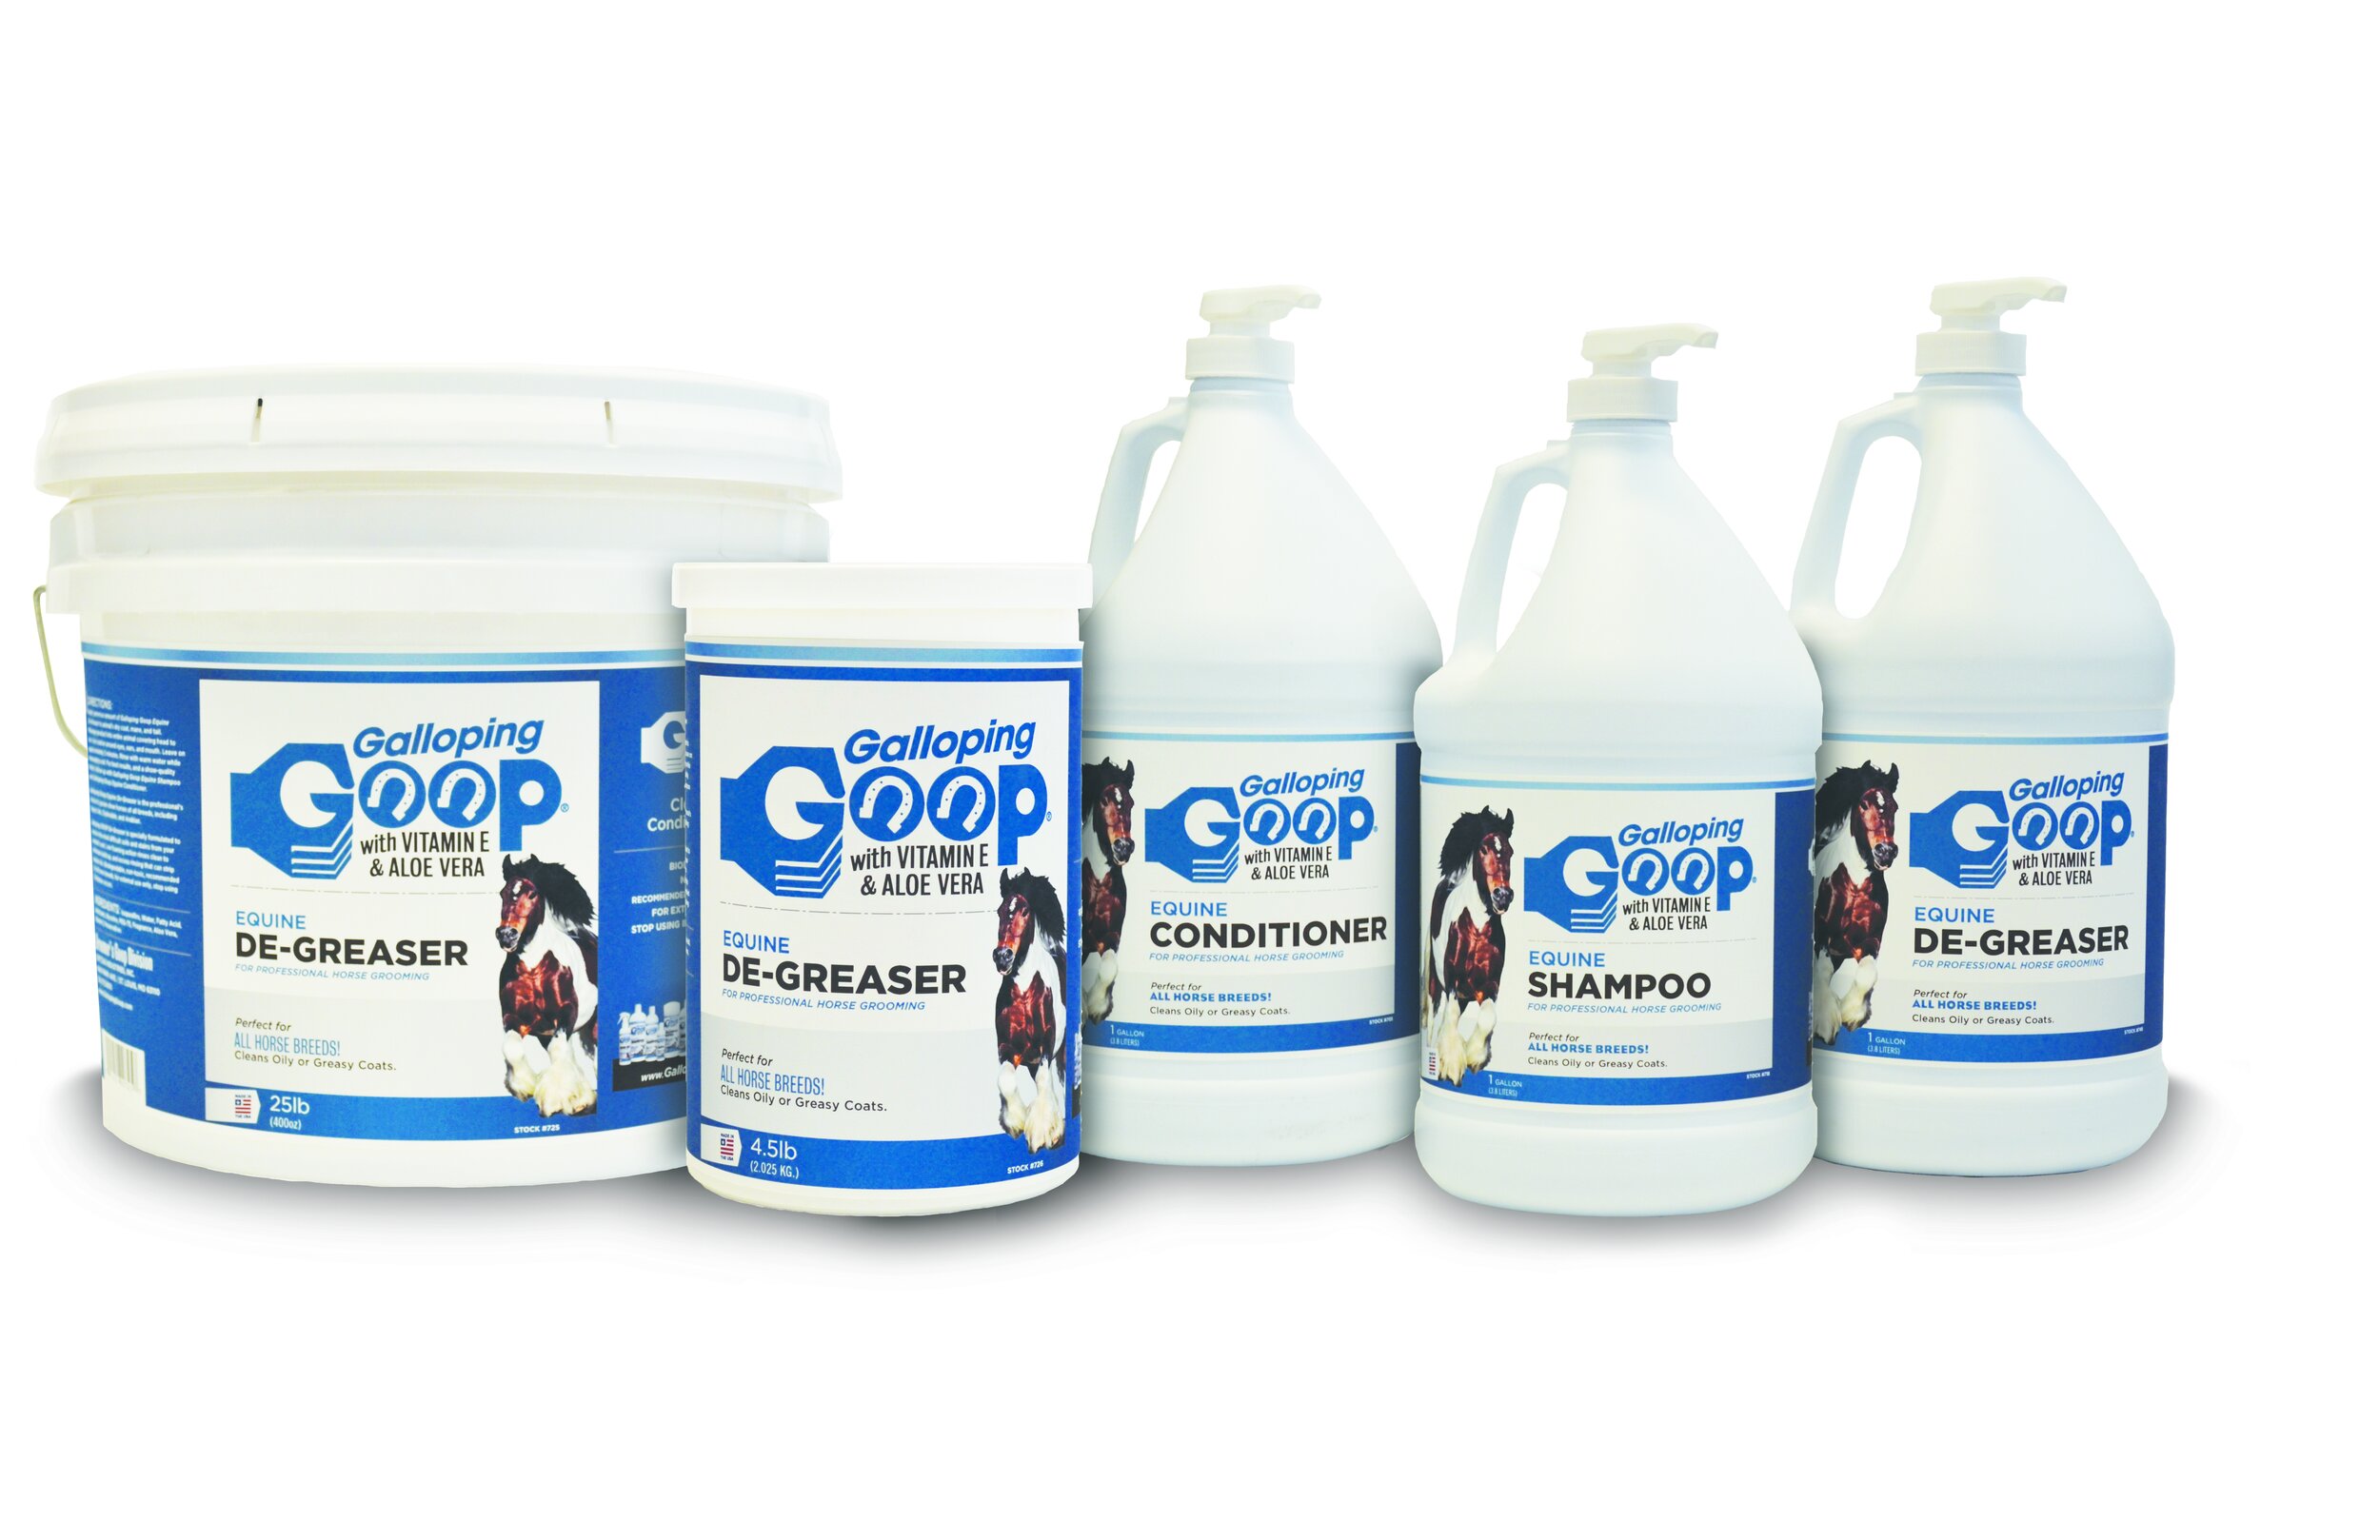 Goop Hand Cleaner and All Goop Cleaning Products